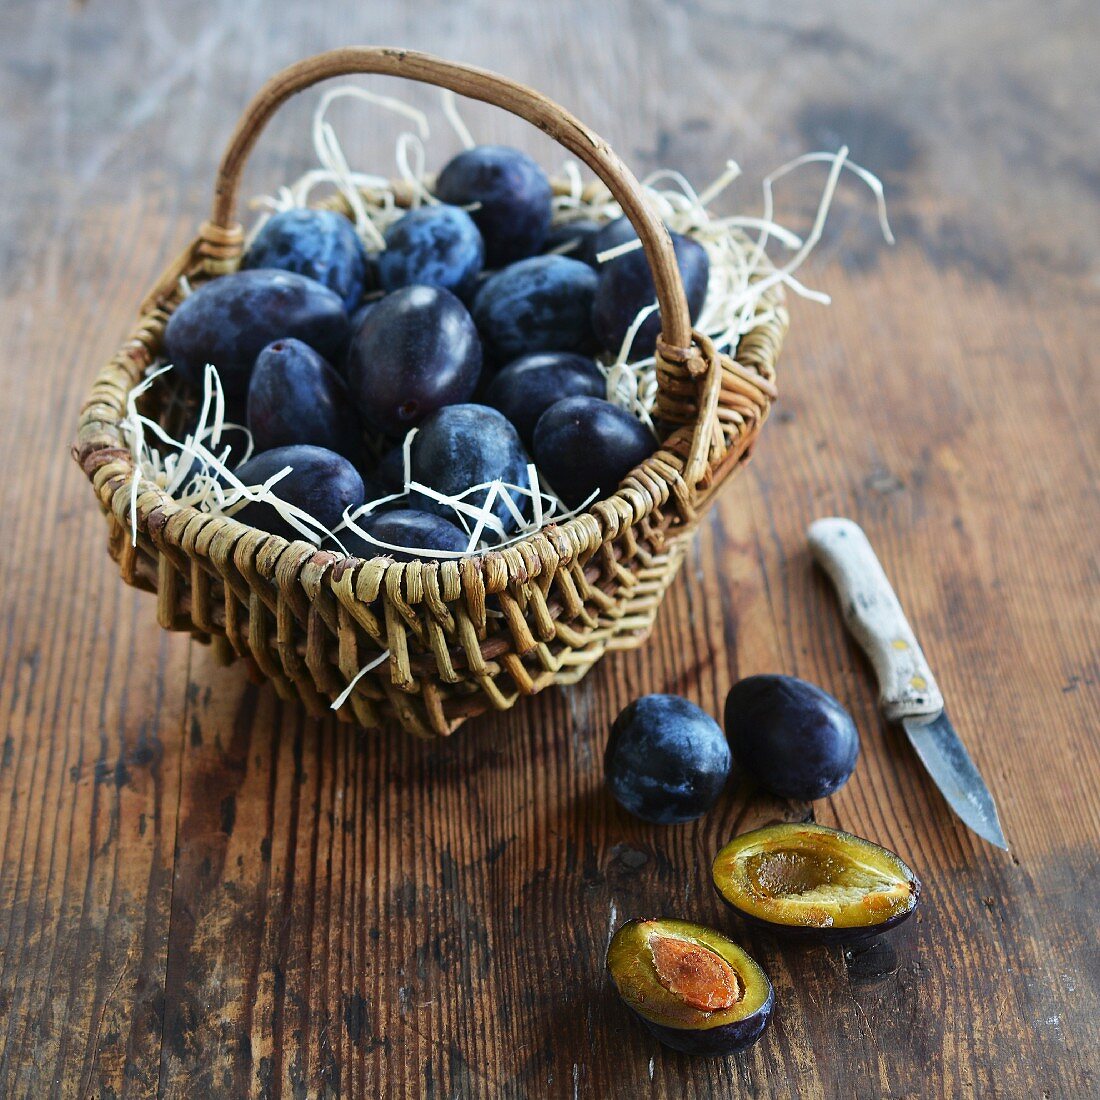 Plums in a rustic basket and next to it